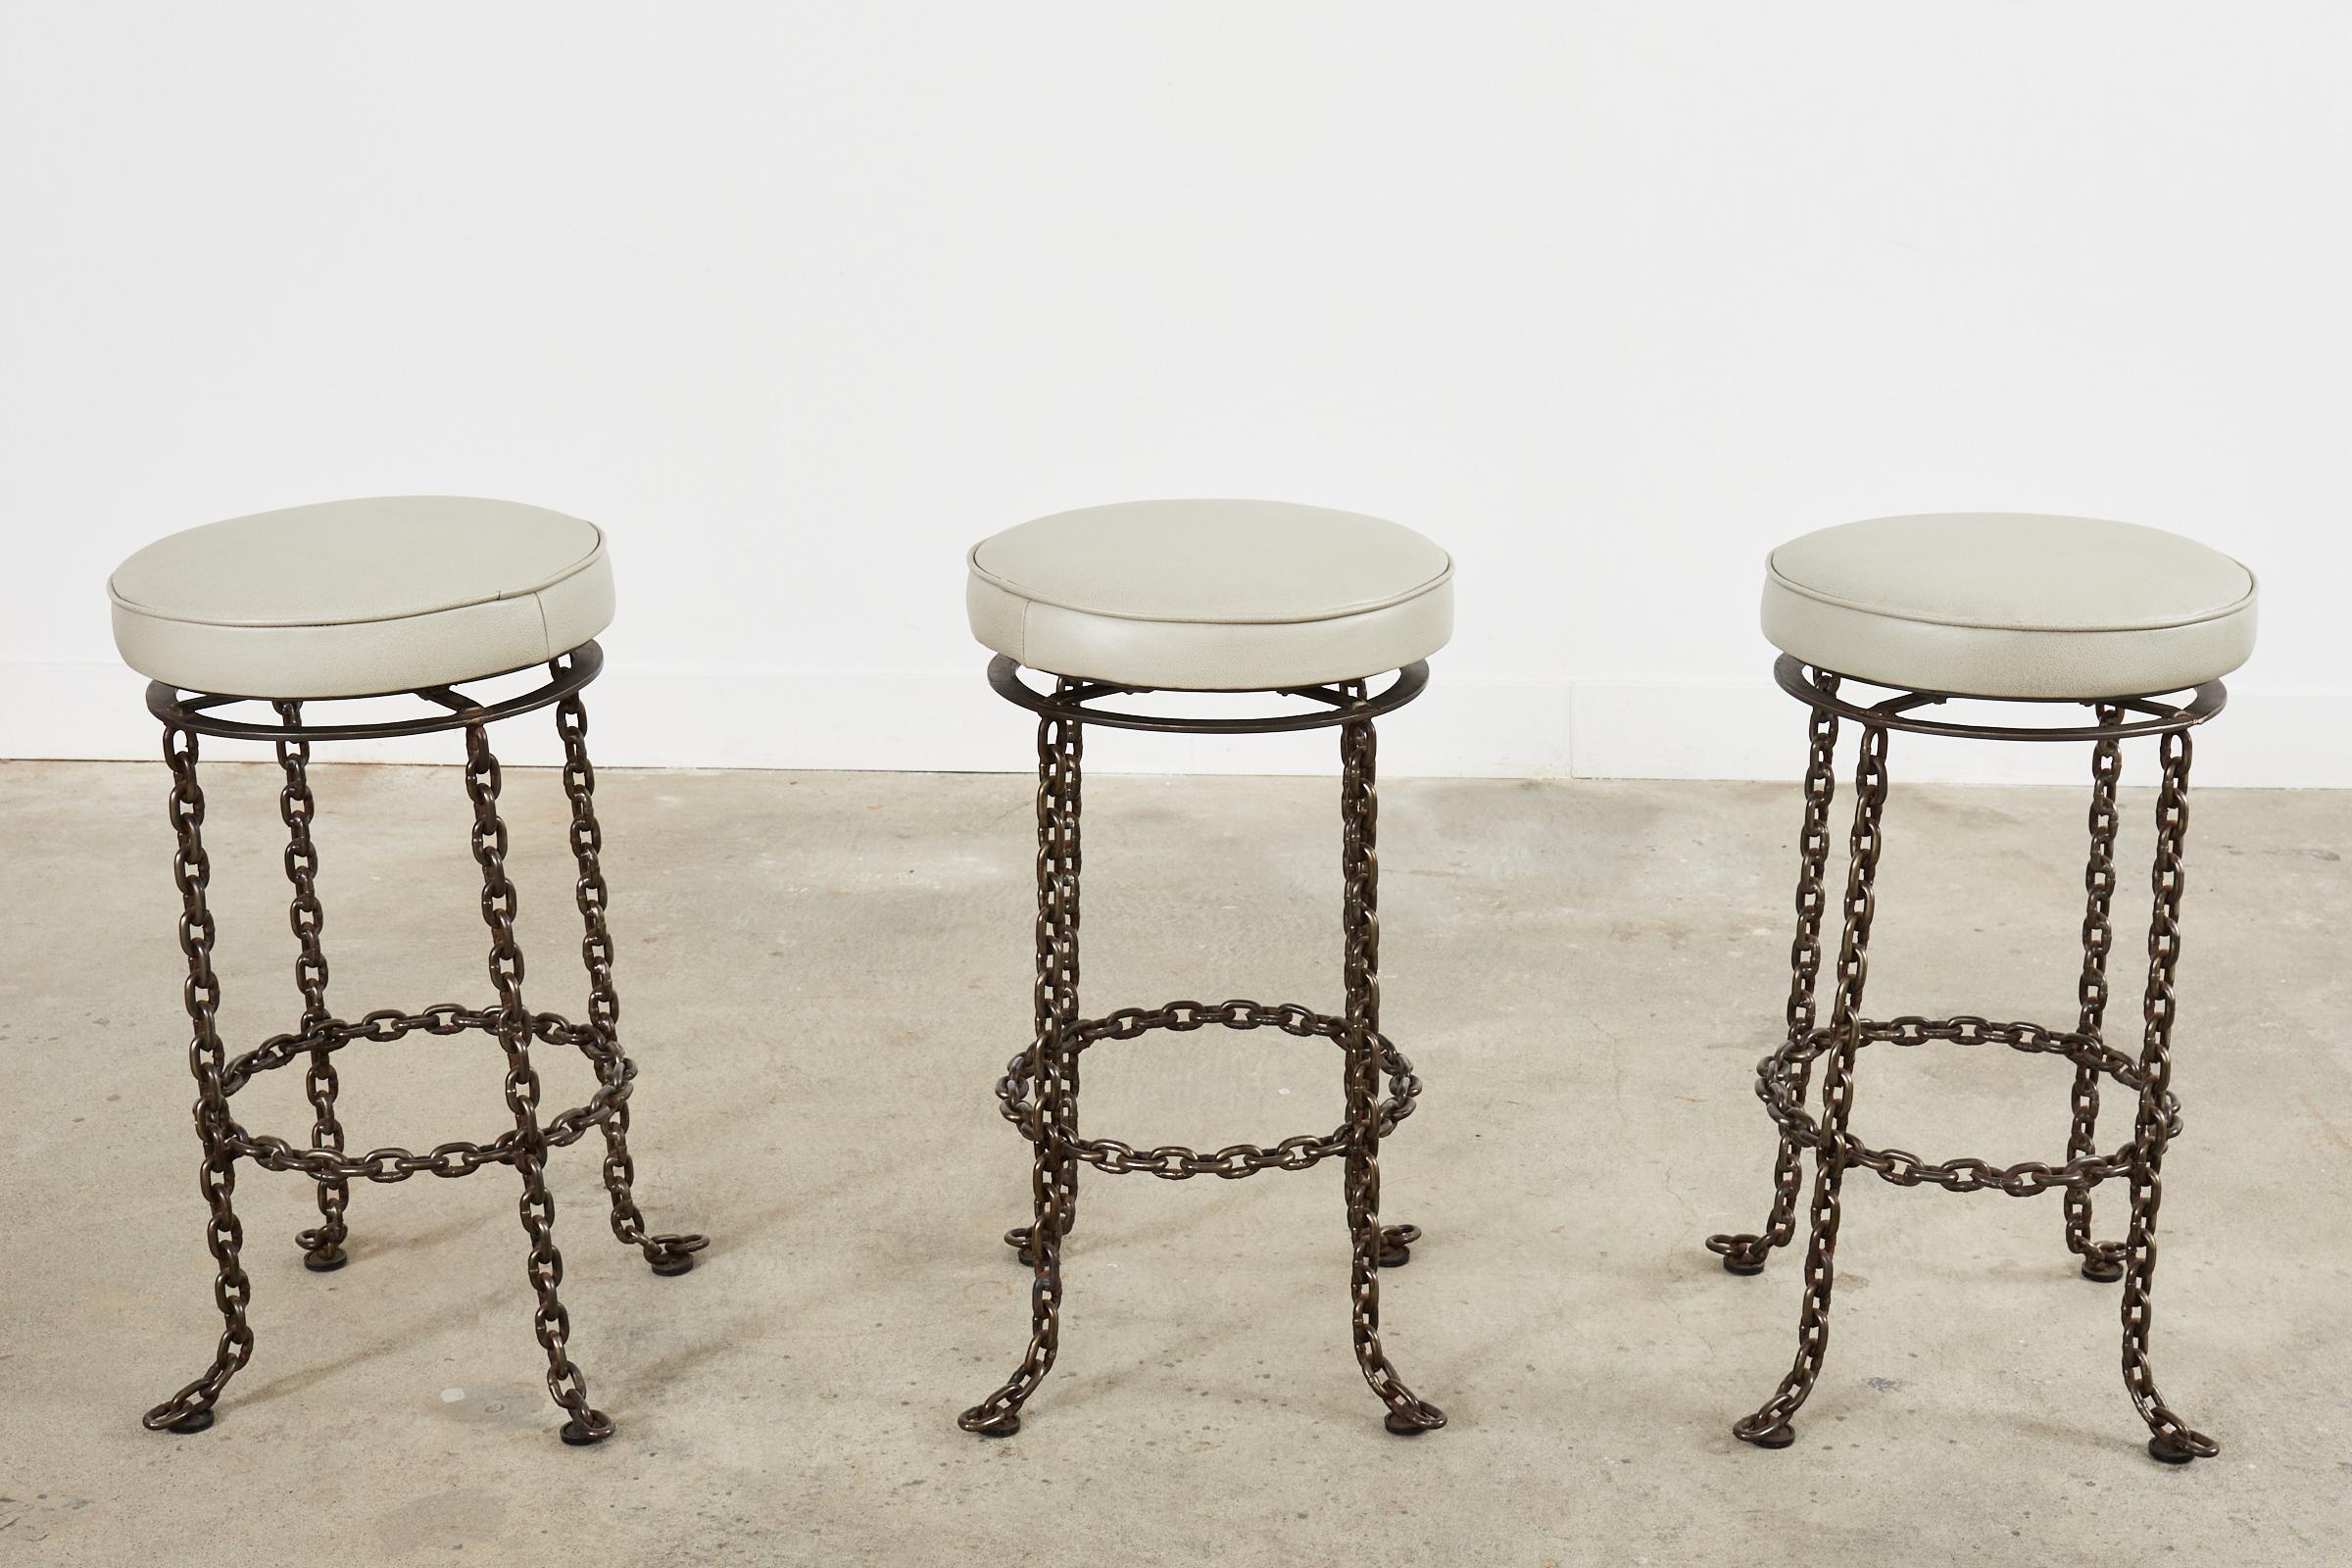 Chic set of three swivel barstools featuring an industrial style sculptural iron chain link base. Each stool is hand-crafted from thick, chunky welded chains having four legs that are splayed at the end. The legs are conjoined by a round stretcher